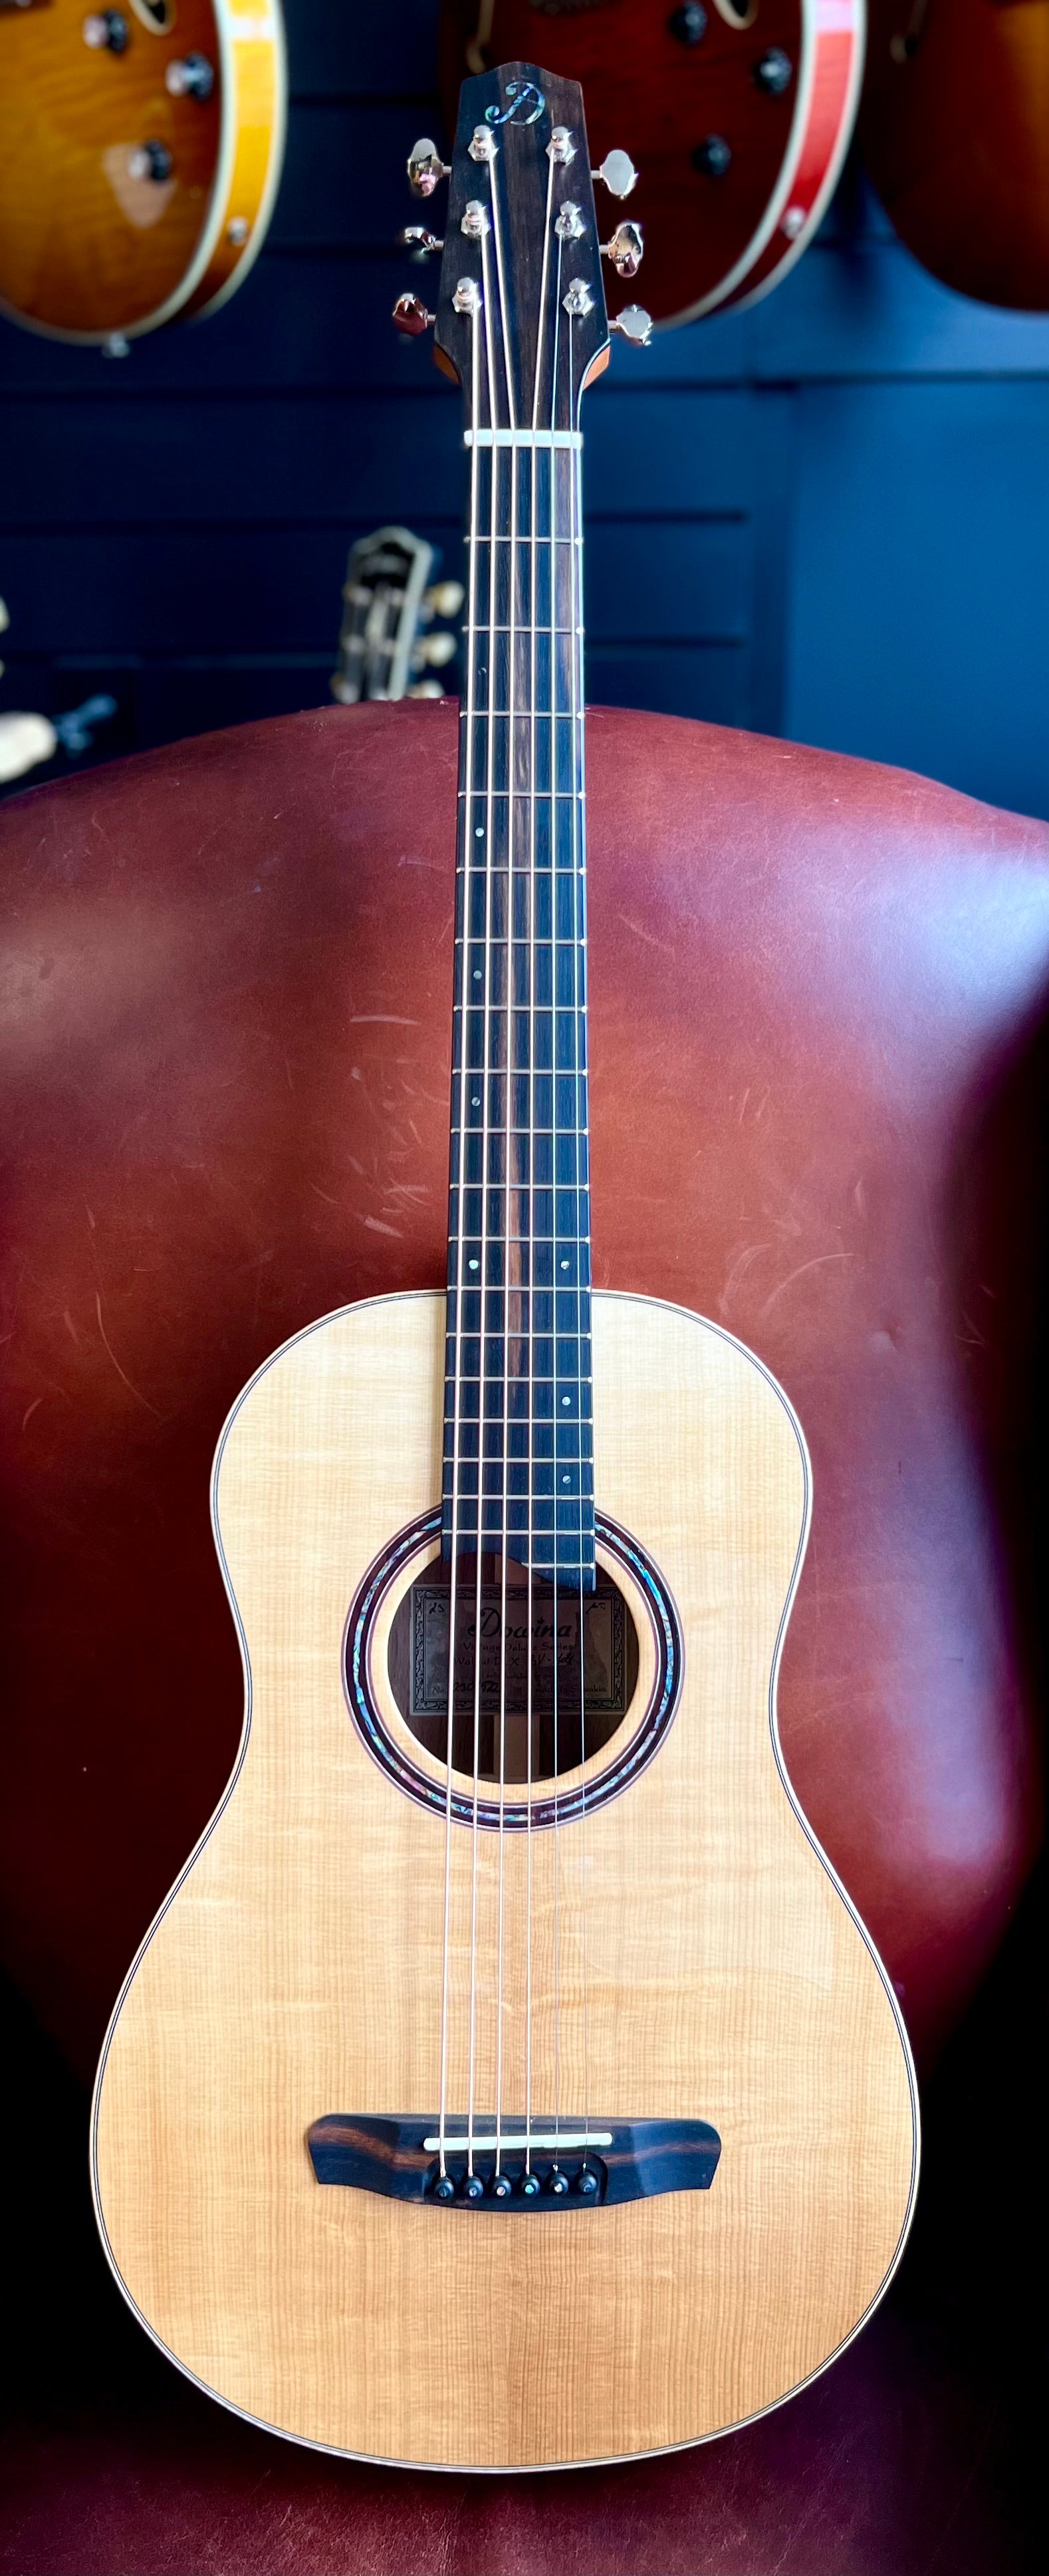 Dowina Walnut BV Deluxe Torrified Swiss Moon Spruce, Acoustic Guitar for sale at Richards Guitars.